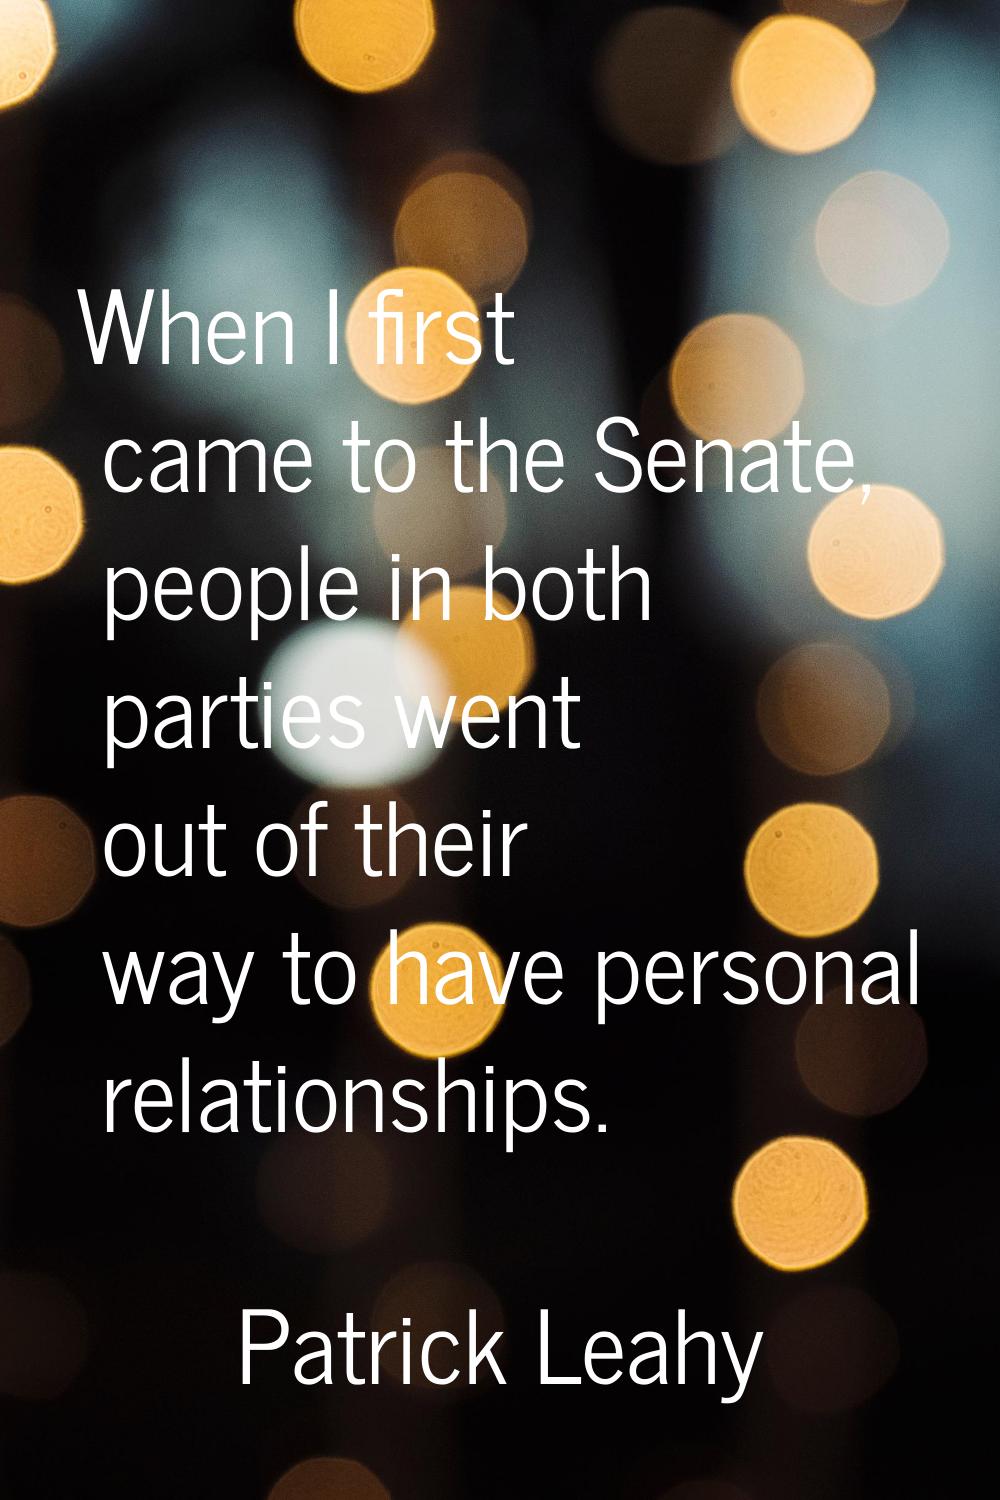 When I first came to the Senate, people in both parties went out of their way to have personal rela